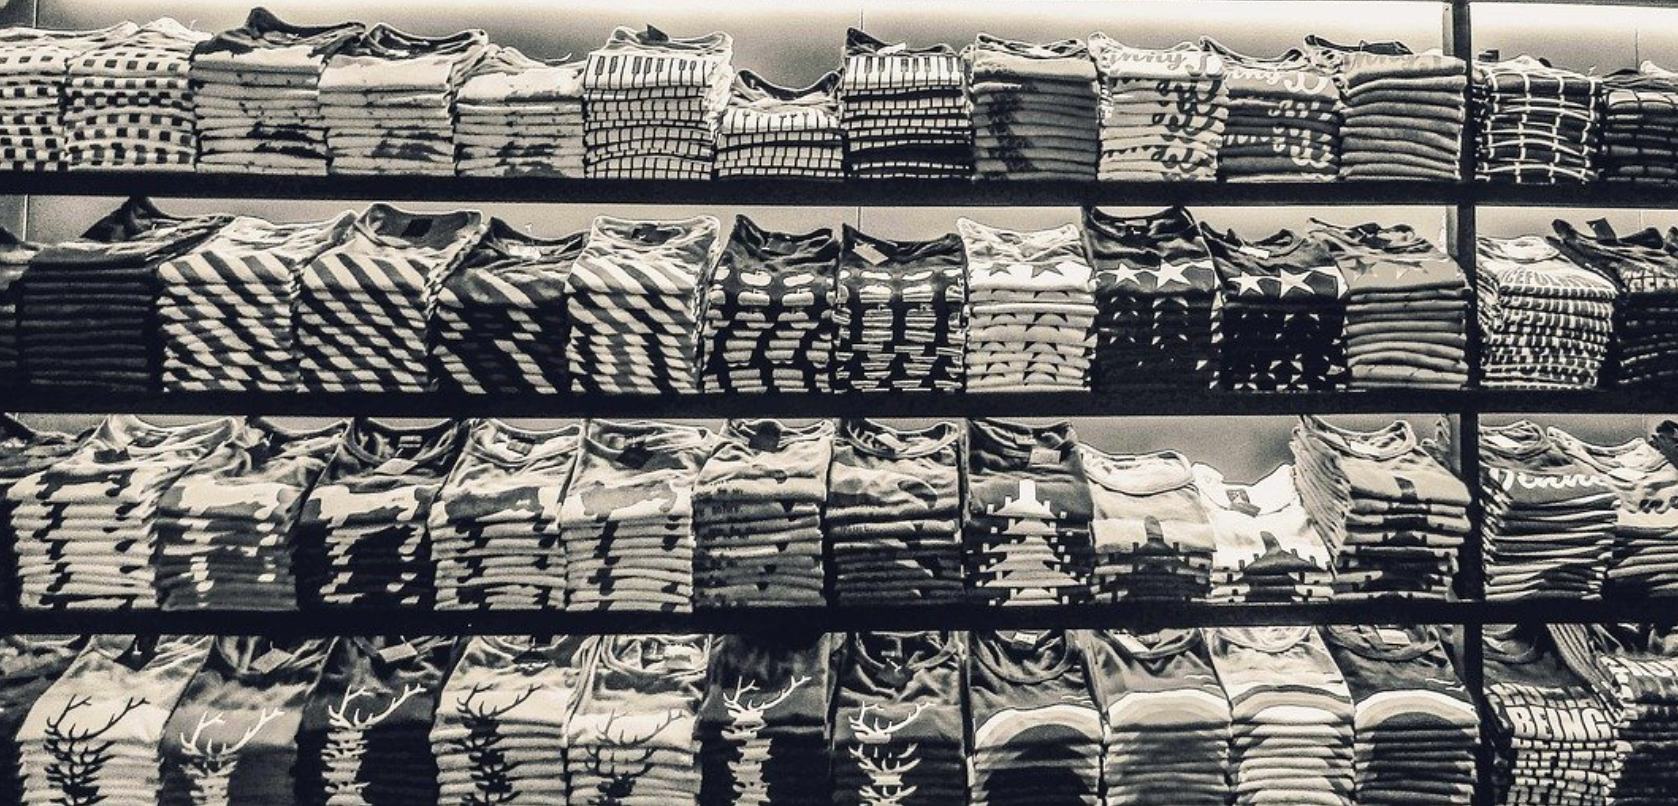 Abandoned? The Impact of Covid-19 on Workers and Businesses at the Bottom of Global Garment Supply Chains